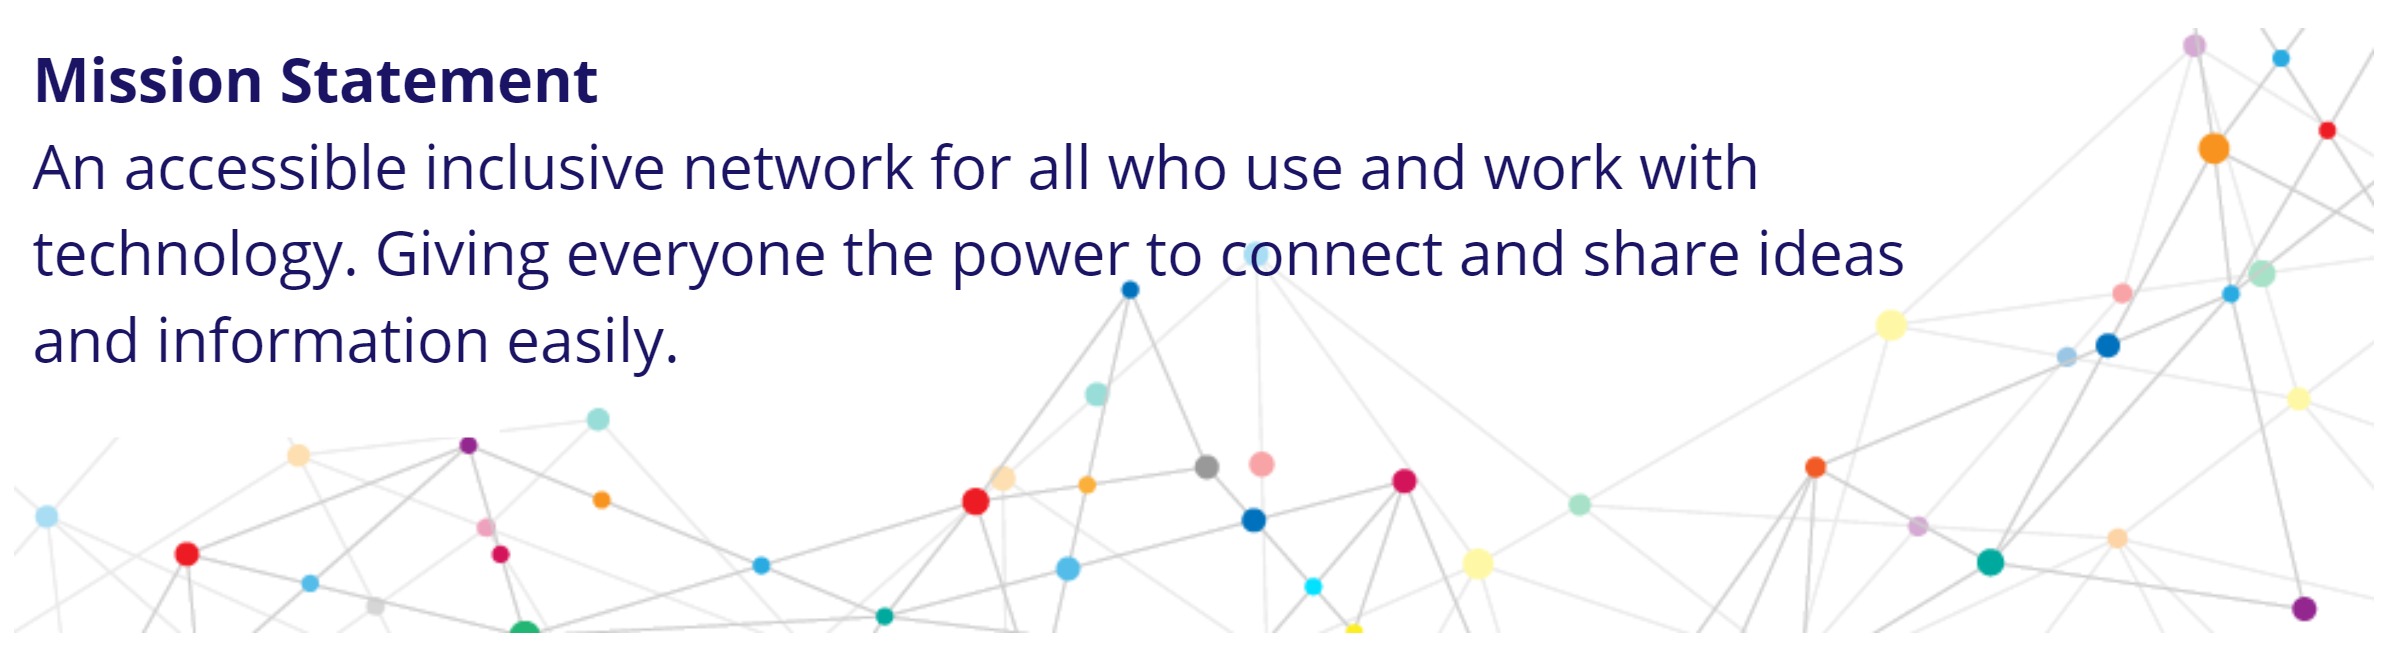 Mission Statement- An accessible inclusive network for all who use and work with technology. Giving everyone the power to connect and share ideas and information easily.